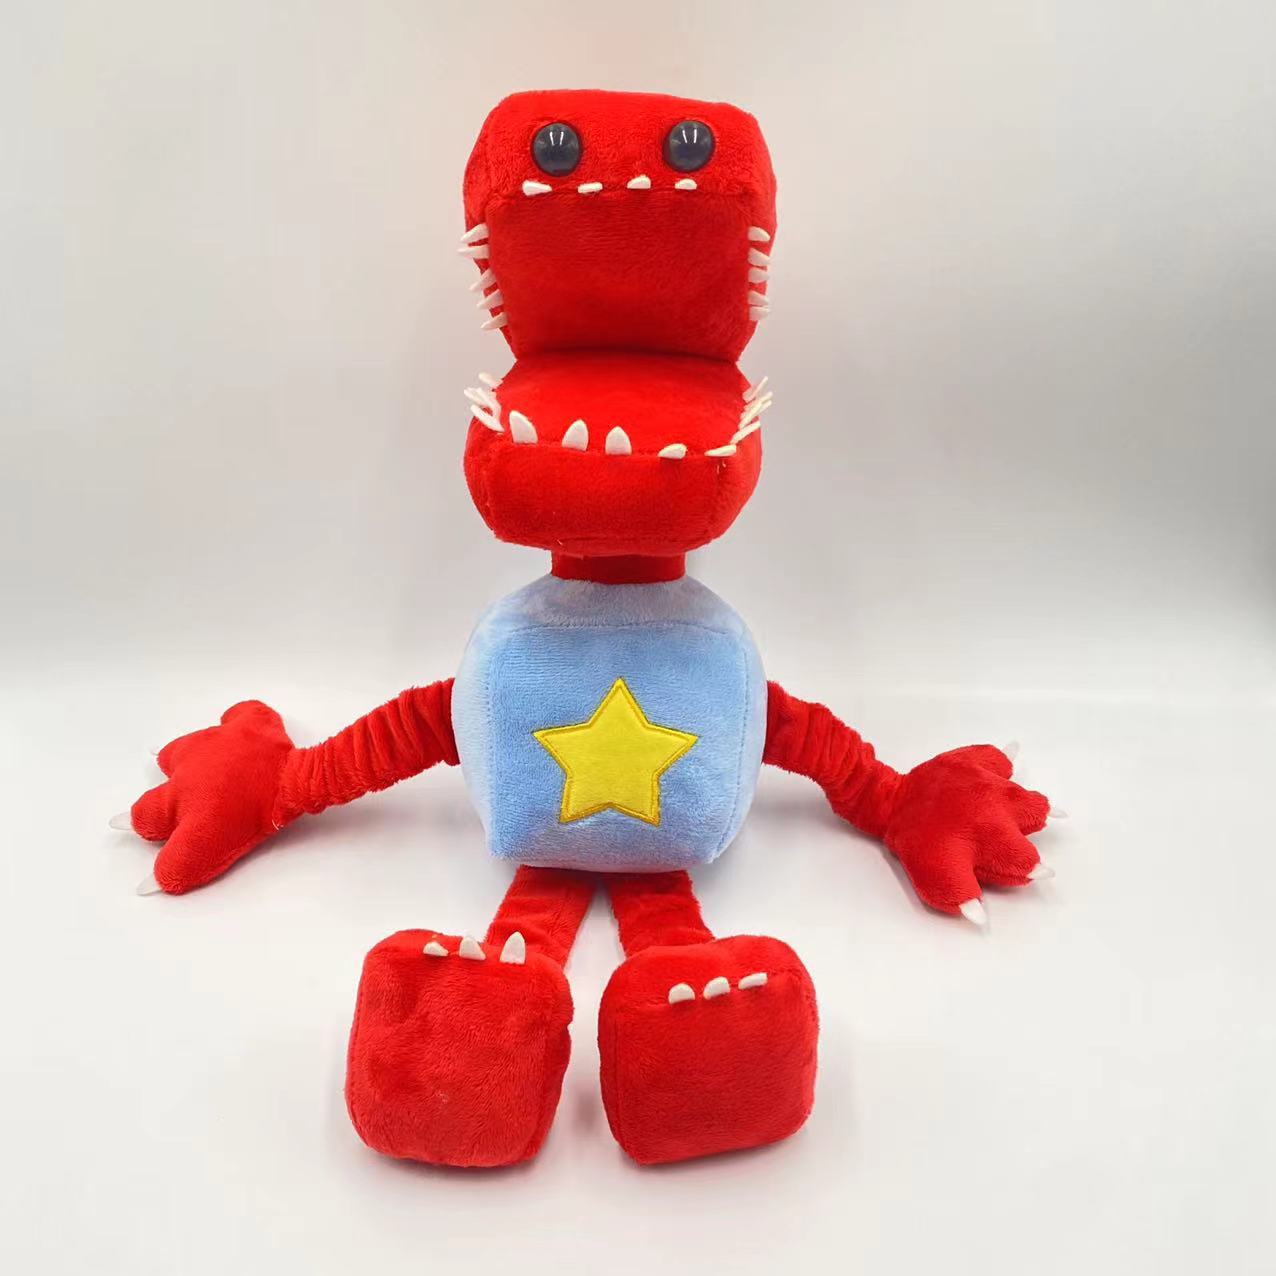 Boxy Boo Toy Cartoon Game Peripheral Red Robot Filled Plush Dolls 40cm Chidlren Toy Gift New 2 - Boxy Boo Plush